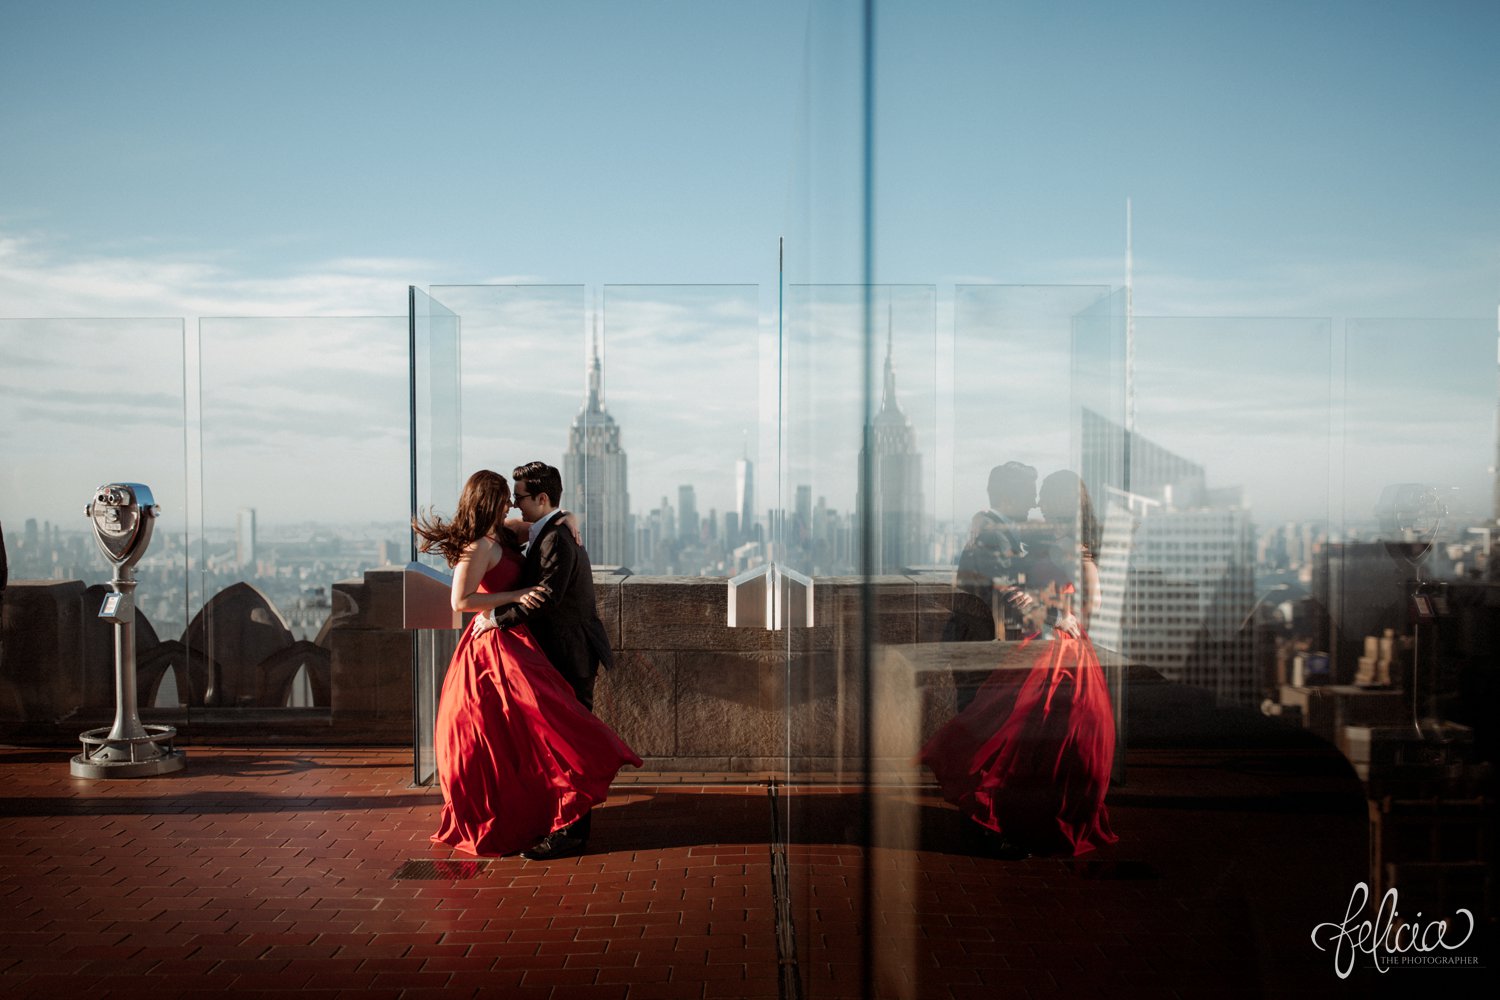 images by feliciathephotographer.com | destination wedding photographer | engagement | new york city | skyline | downtown | urban | formal | classic | elegant | long red gown | suit and tie | top of the rock | sunrise | elegant | glam | reflection | 